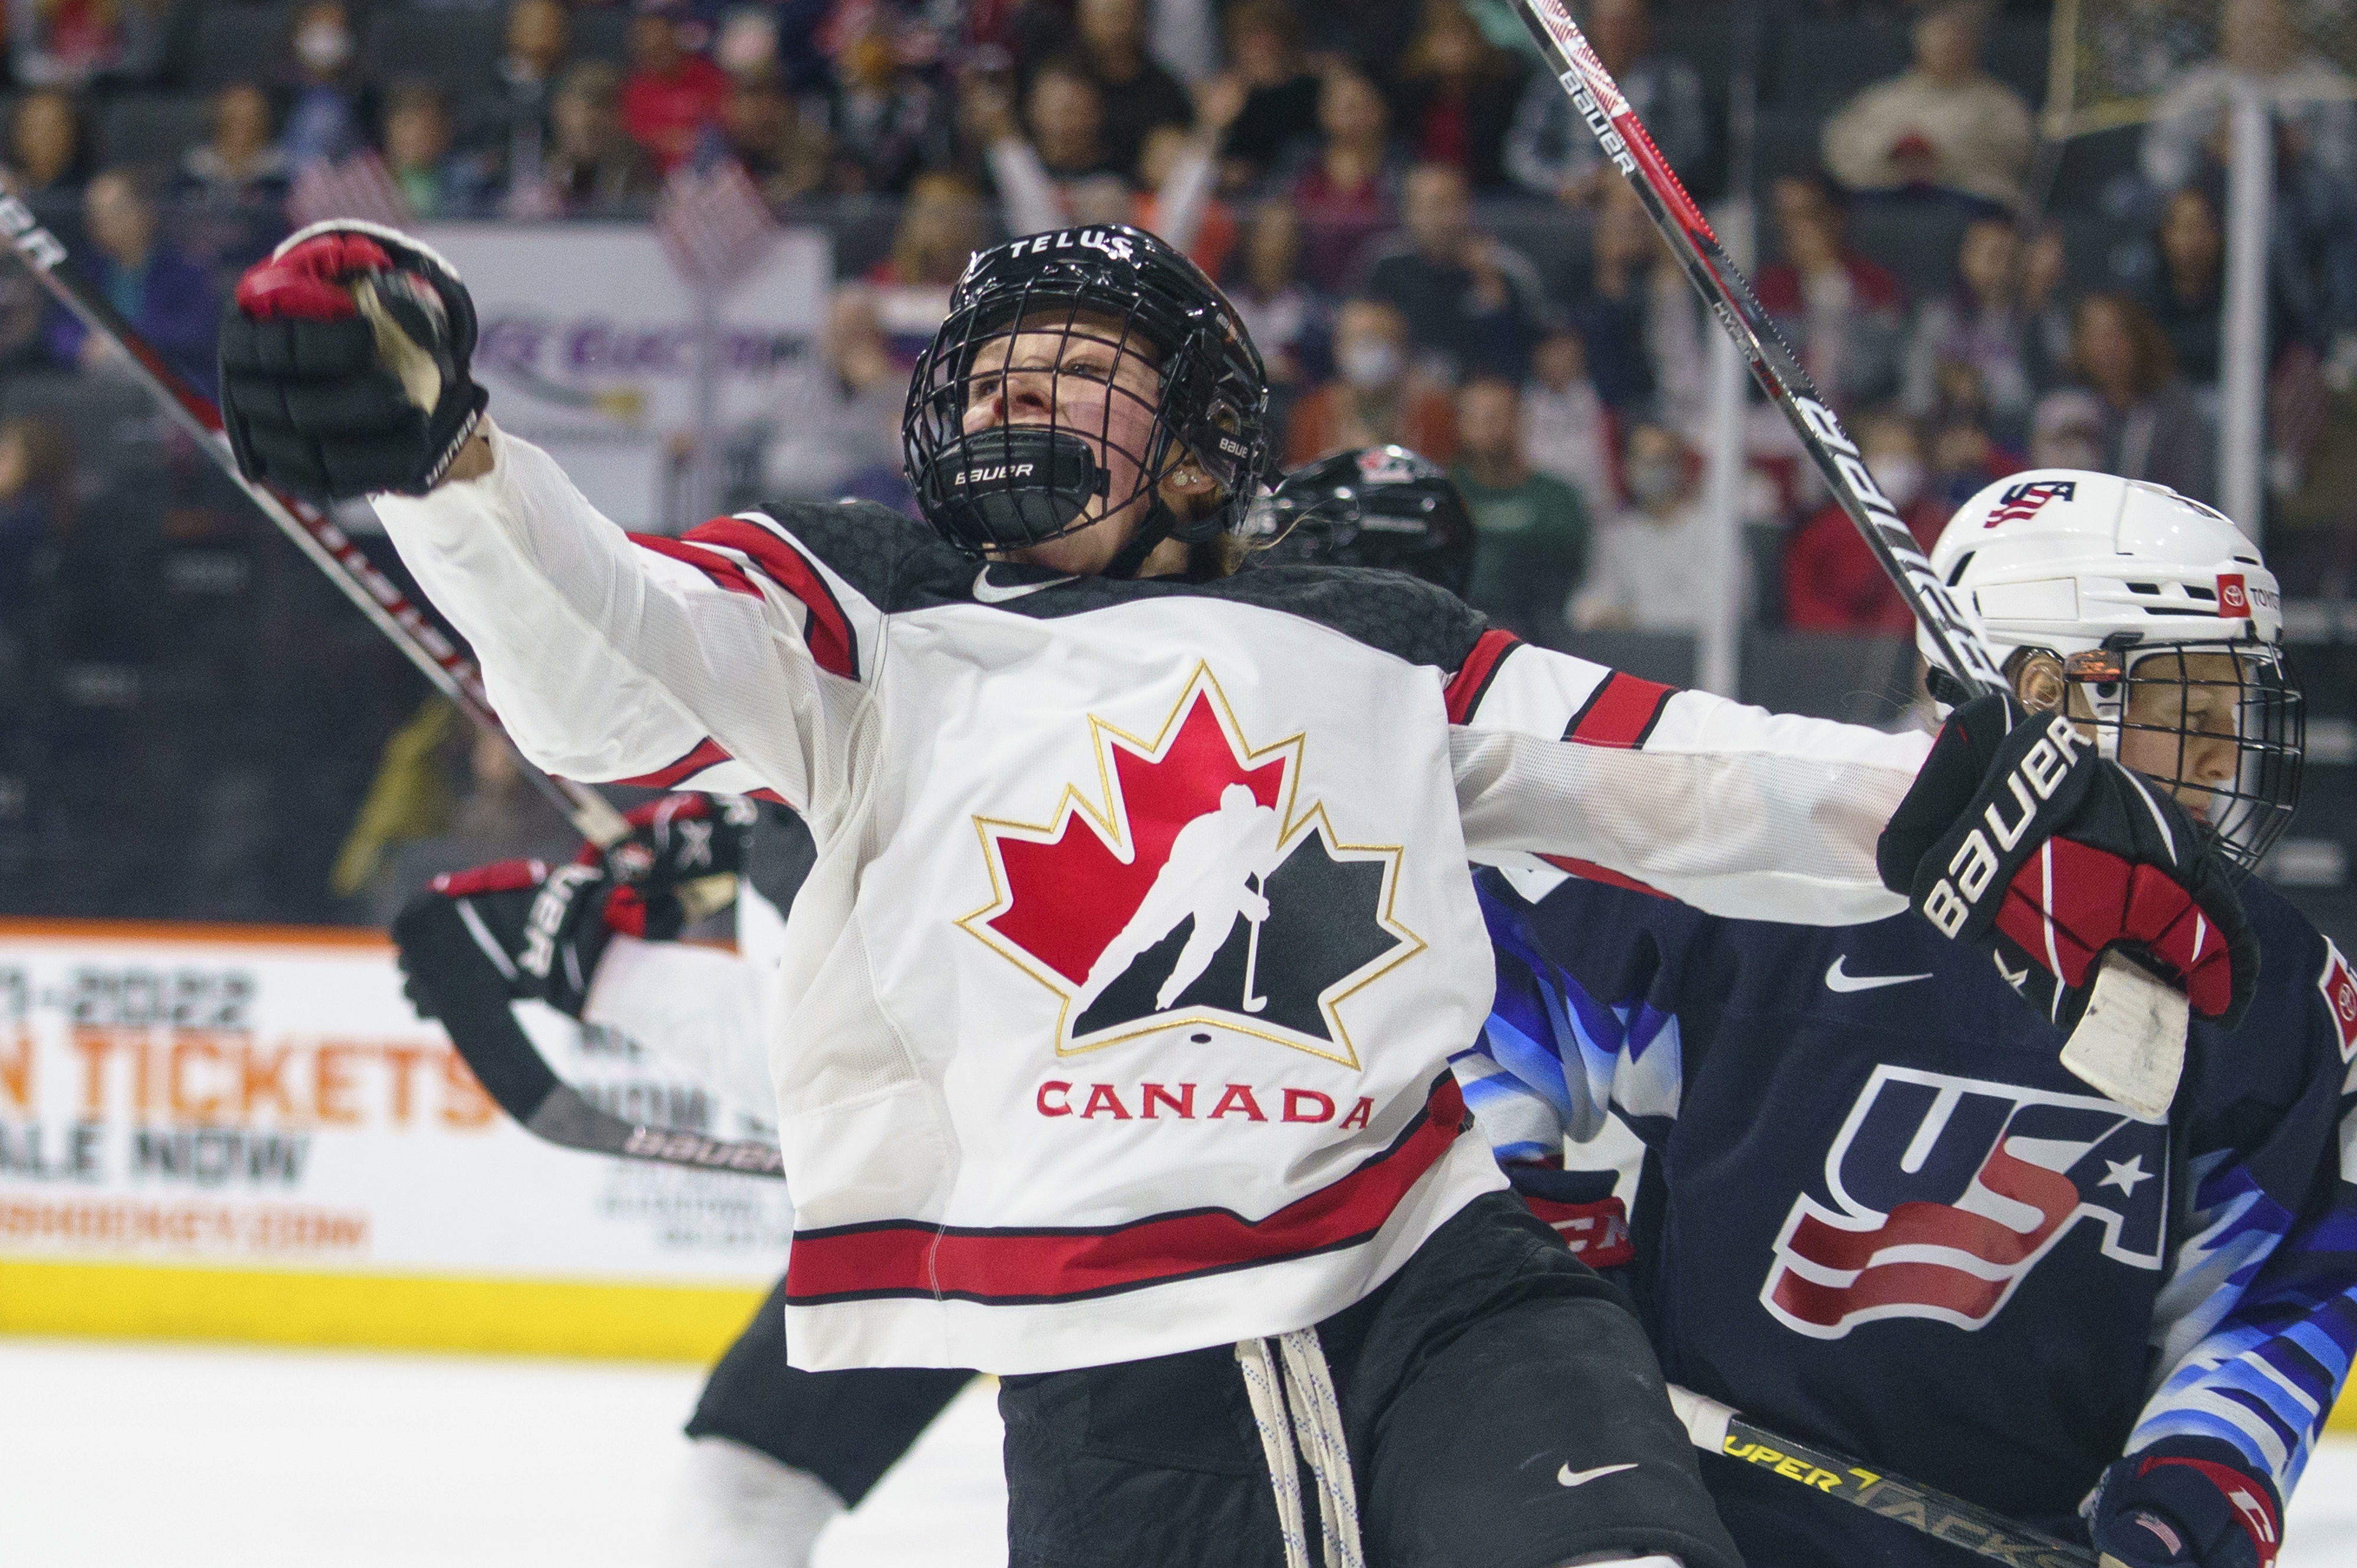 Canada beats US 3-1 in pre-Olympic womens hockey game